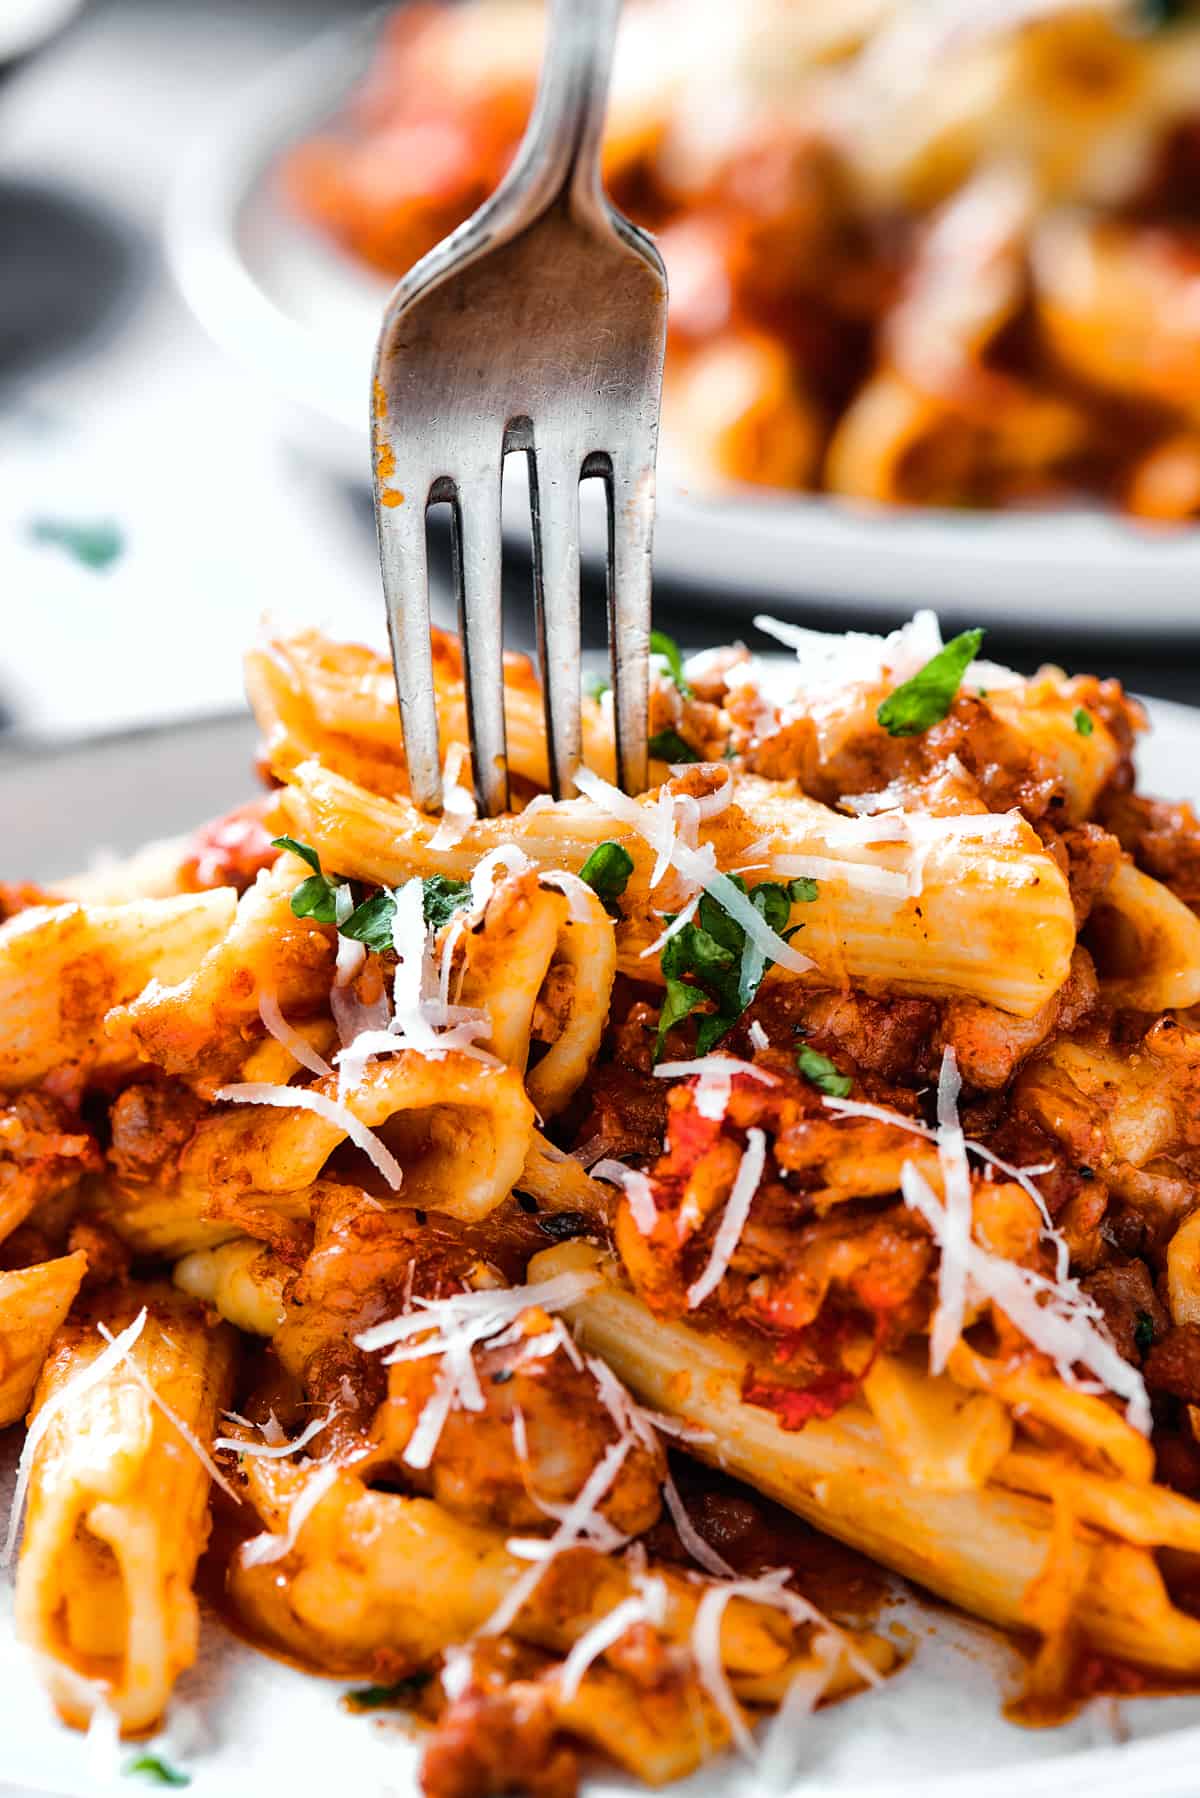 A fork digging into a plate of baked mostaccioli.